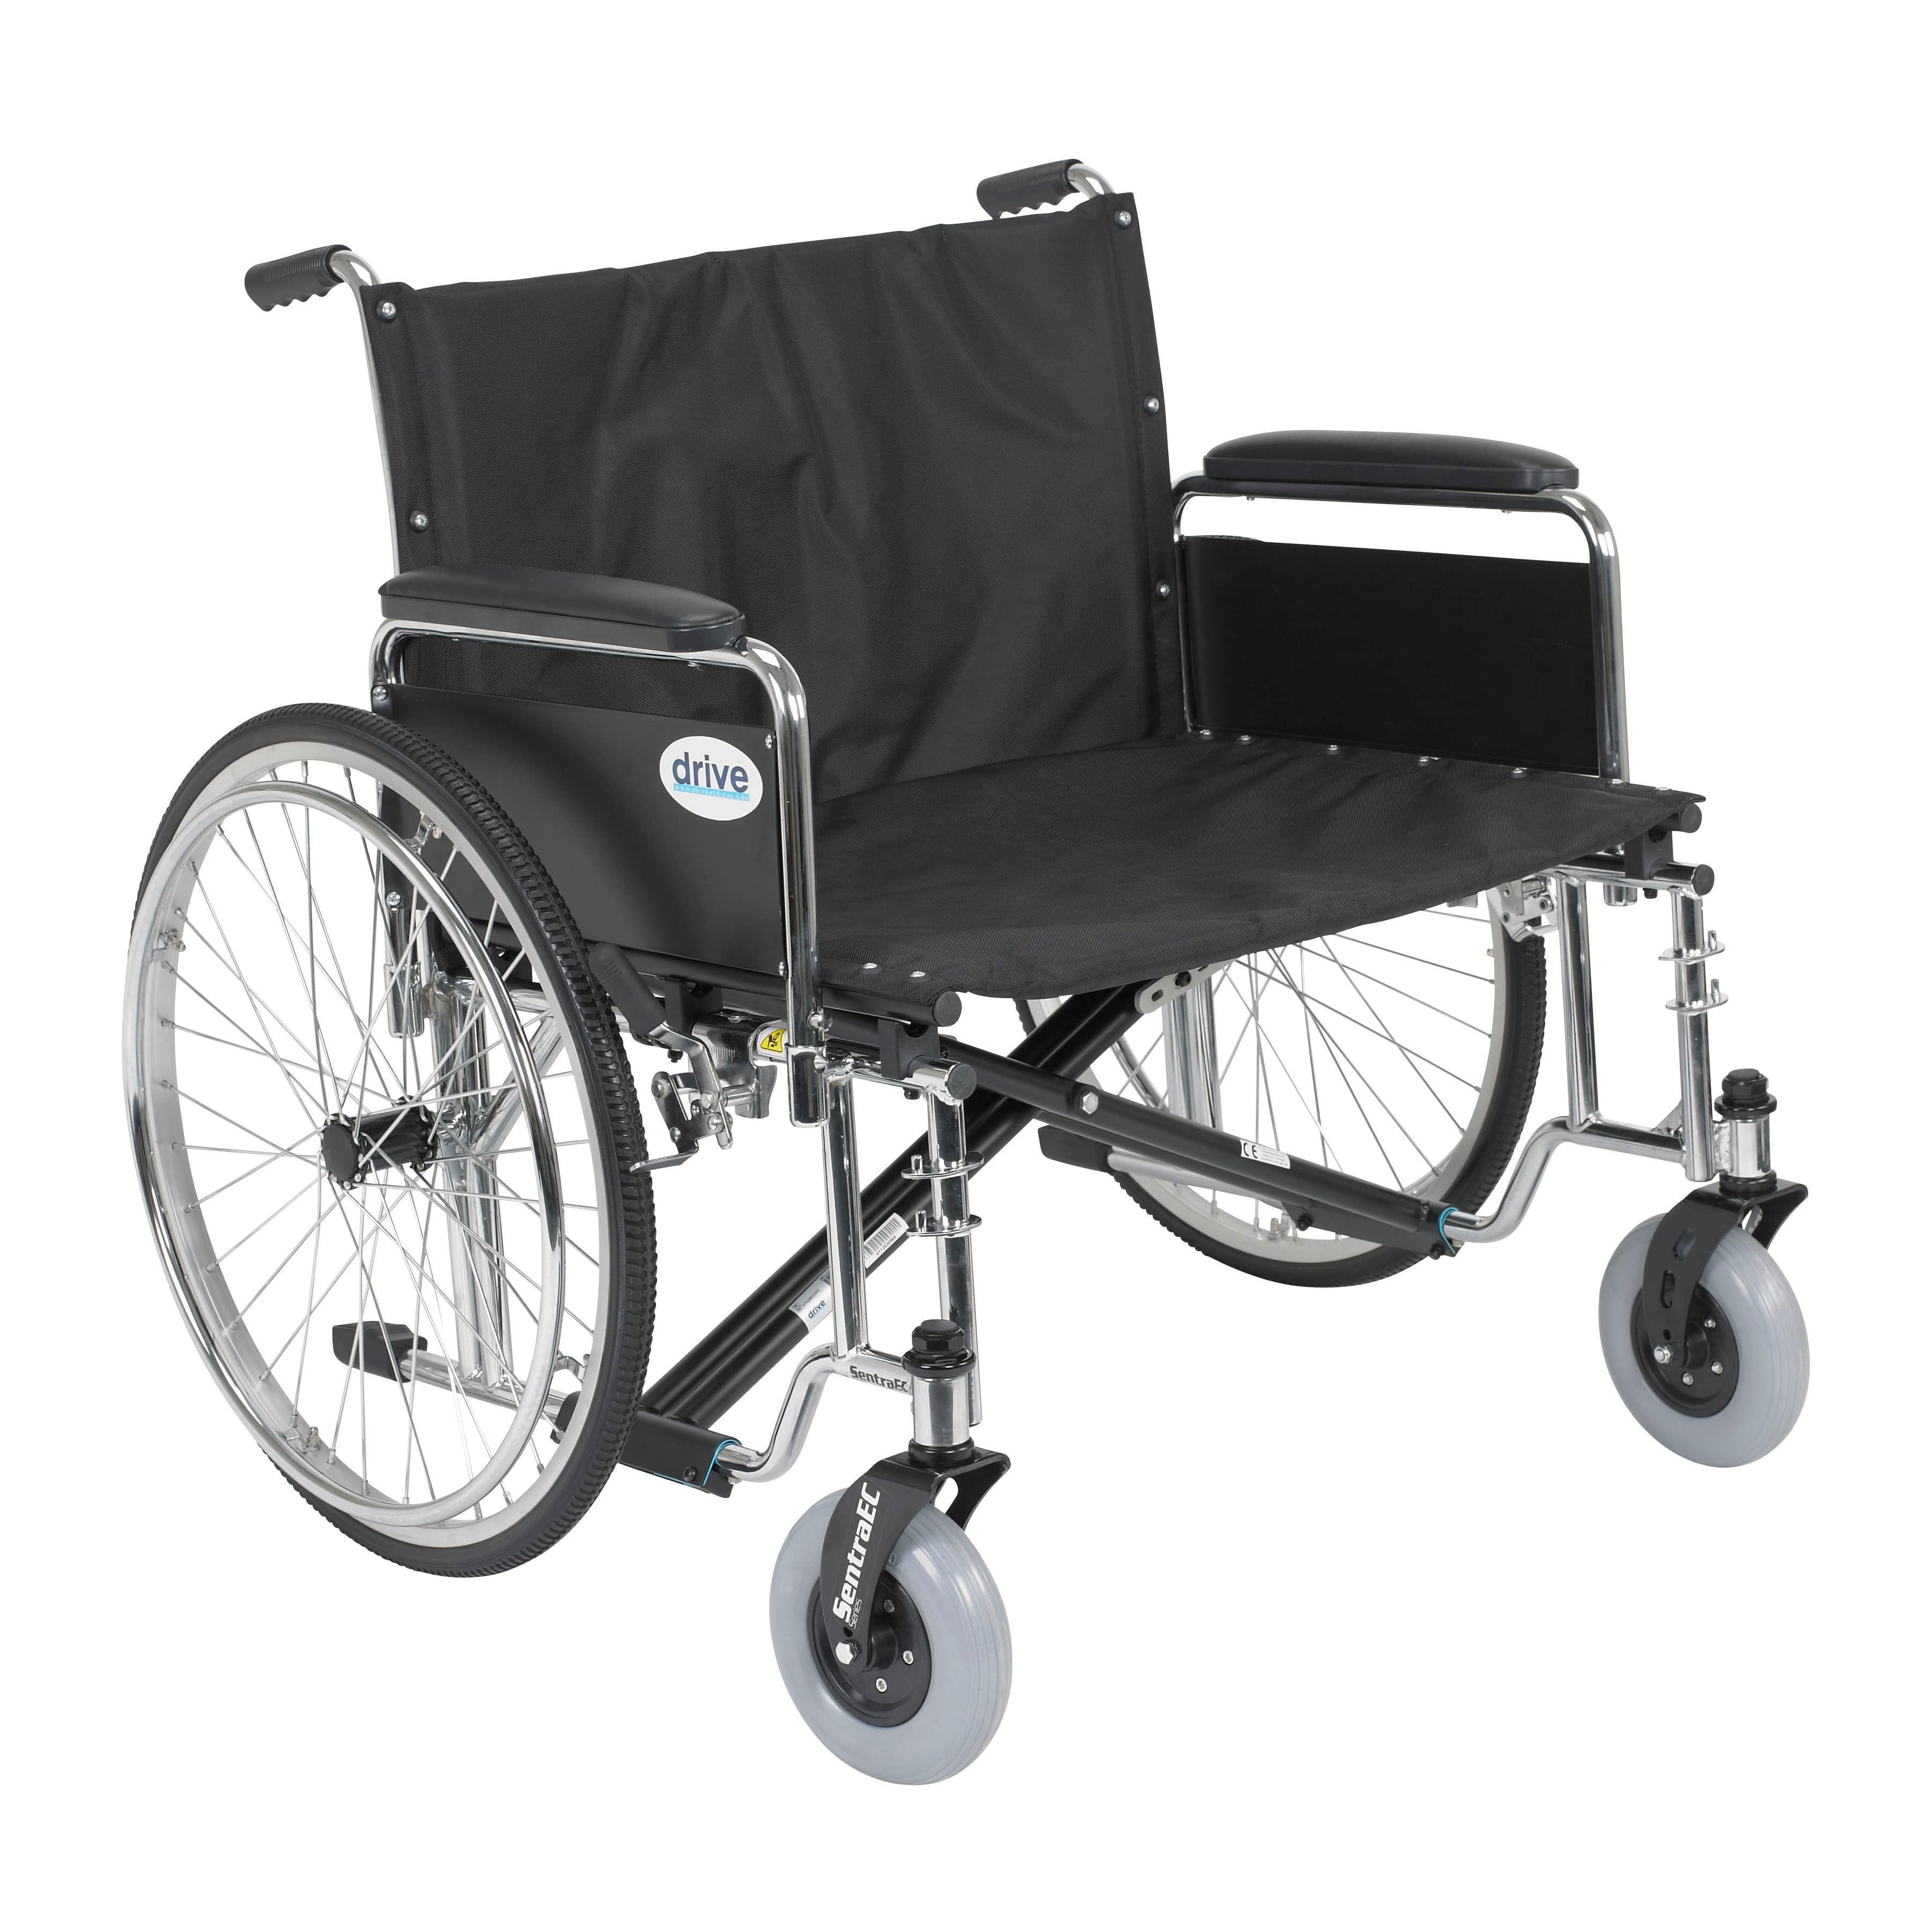 Drive Medical Wheelchairs Detachable Full Arms / 28" Seat Drive Medical Sentra EC Heavy Duty Extra Wide Wheelchair